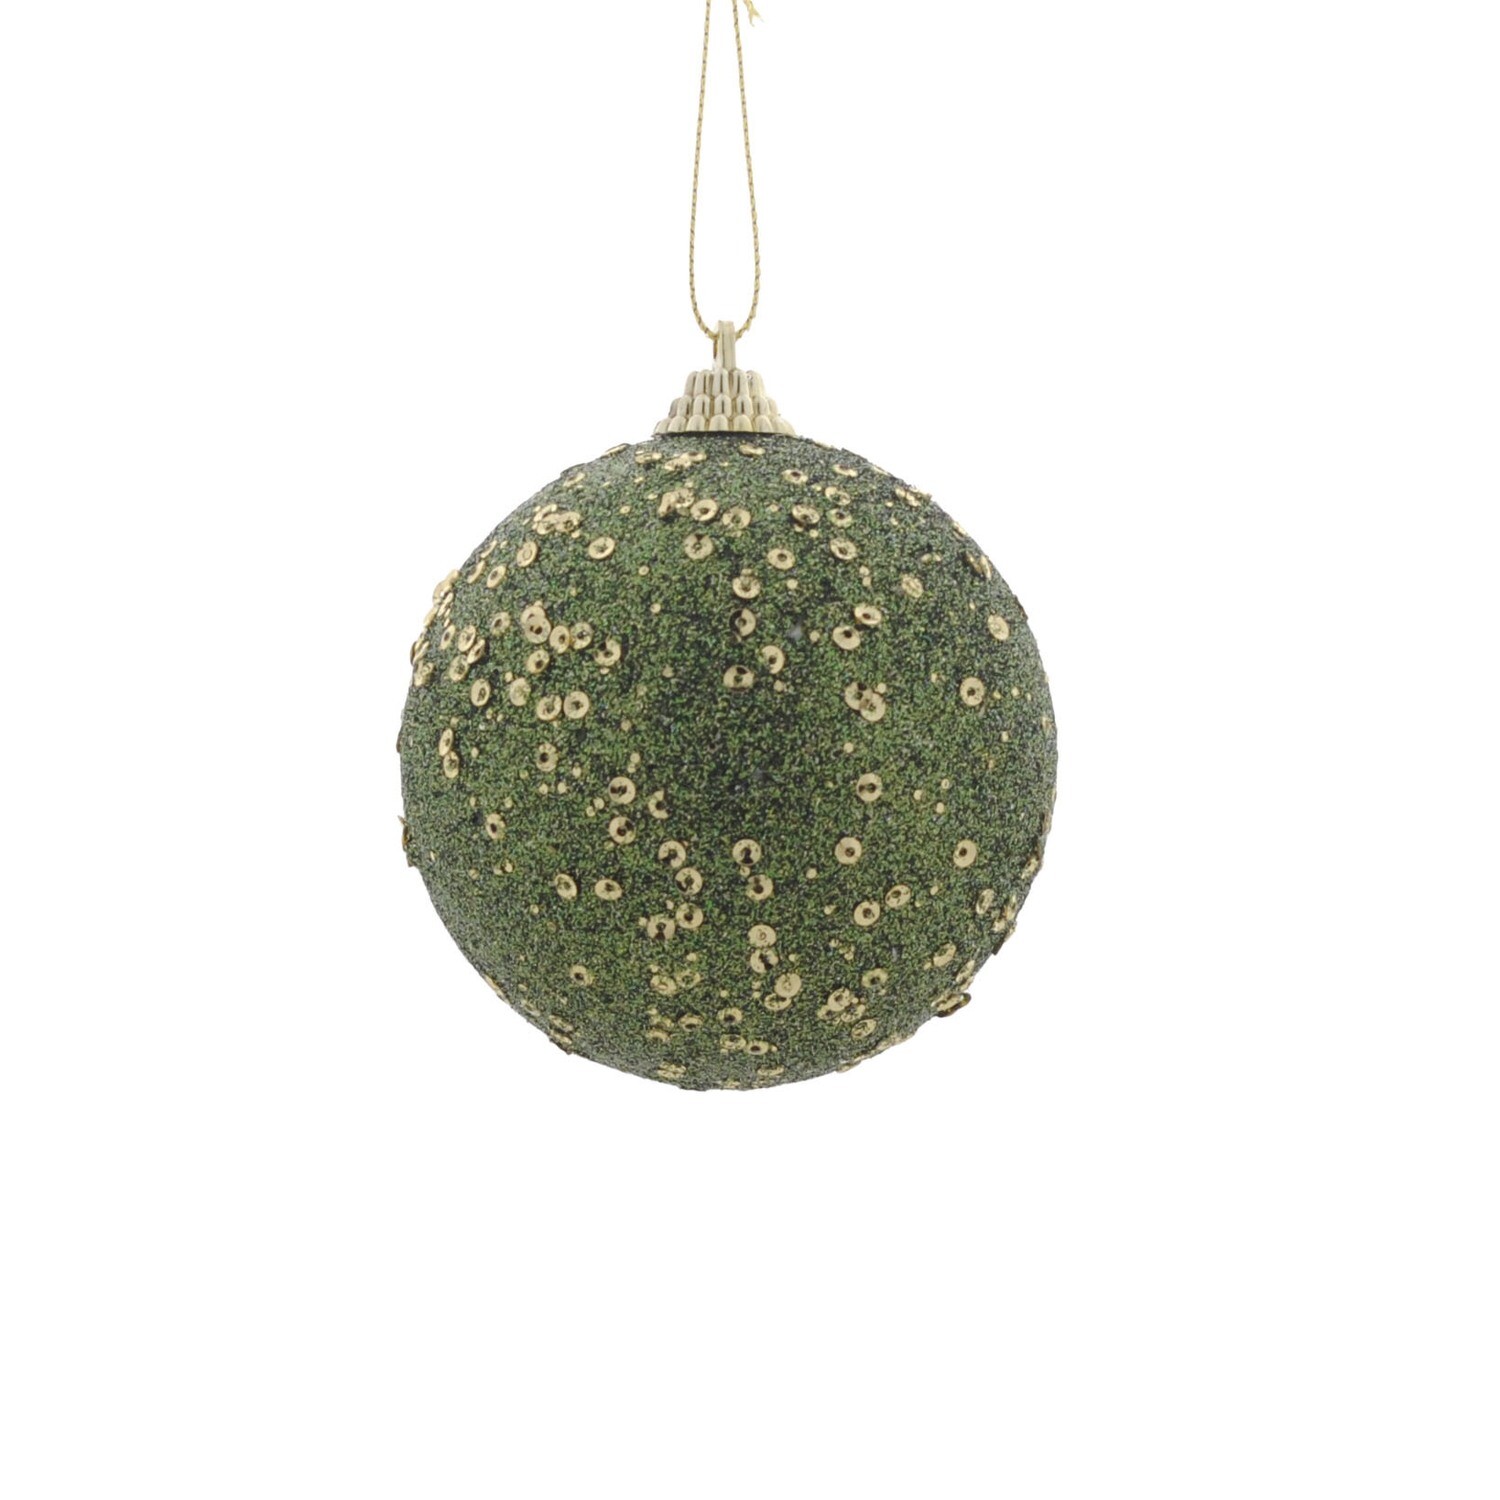 Bauble With Sequins Green 8cm